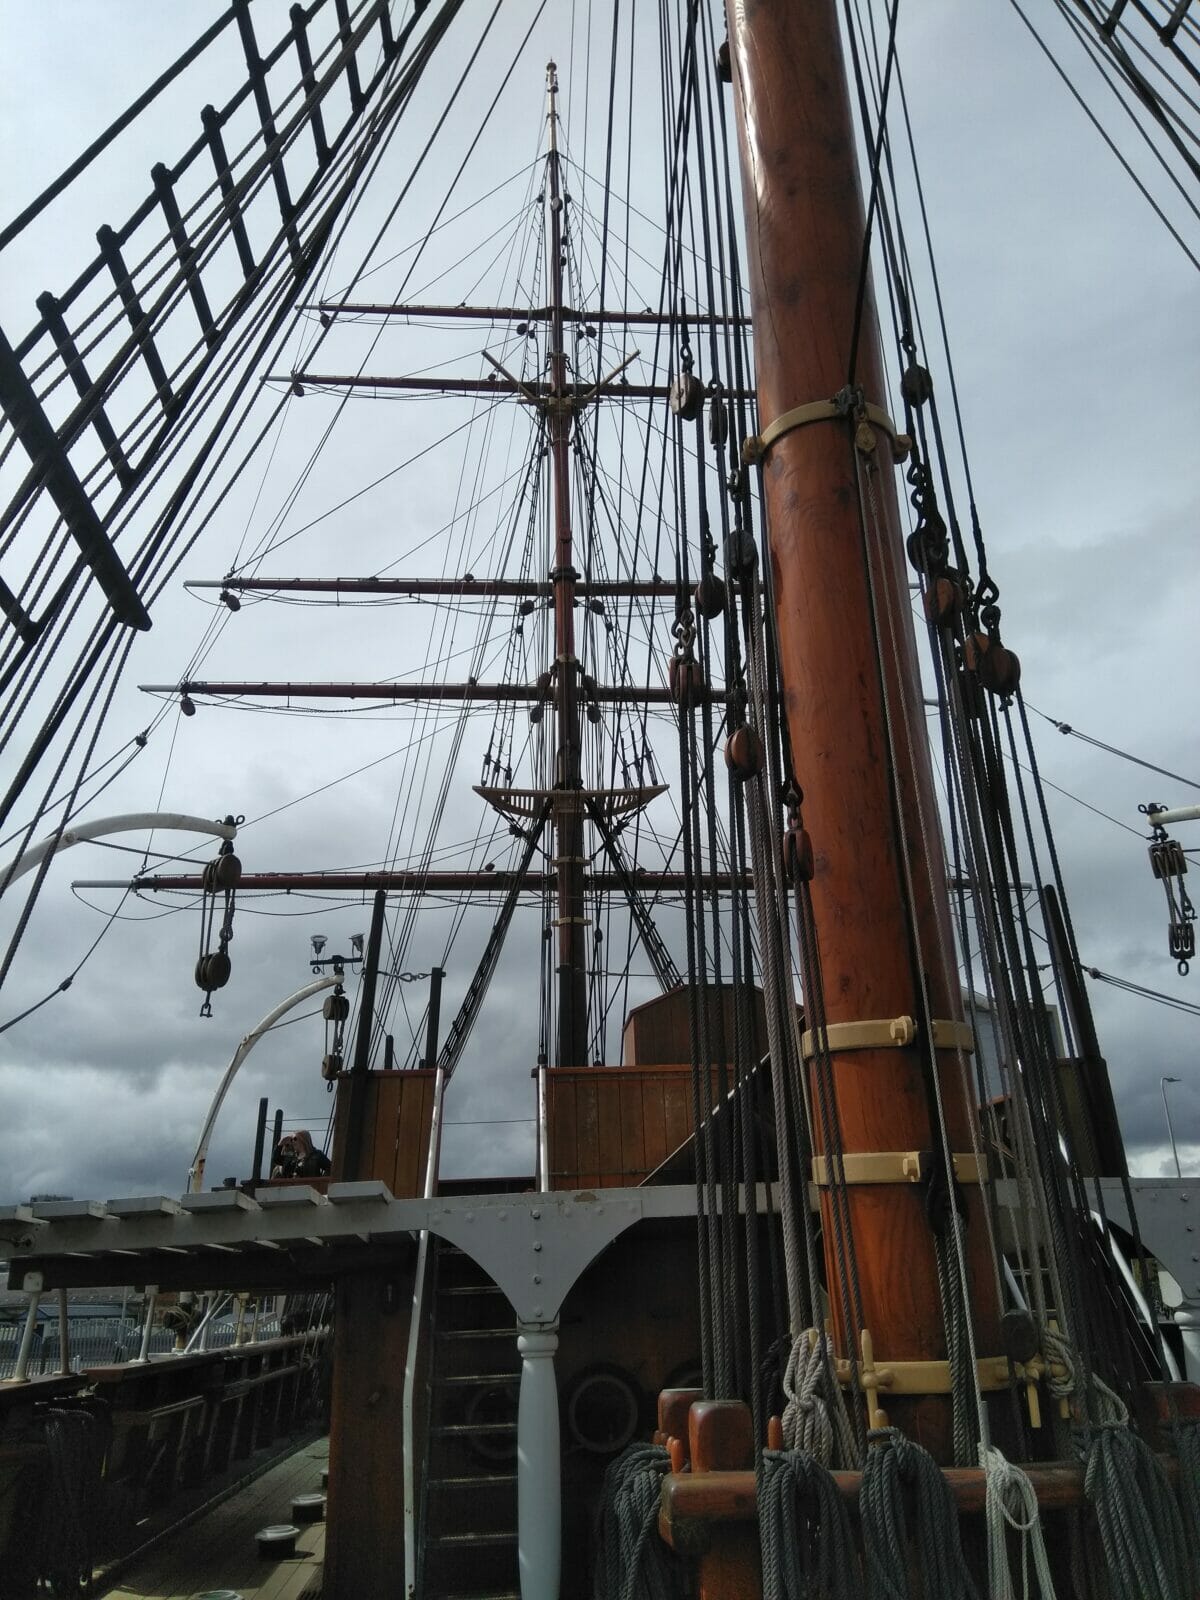 A lot of mast and even more rigging